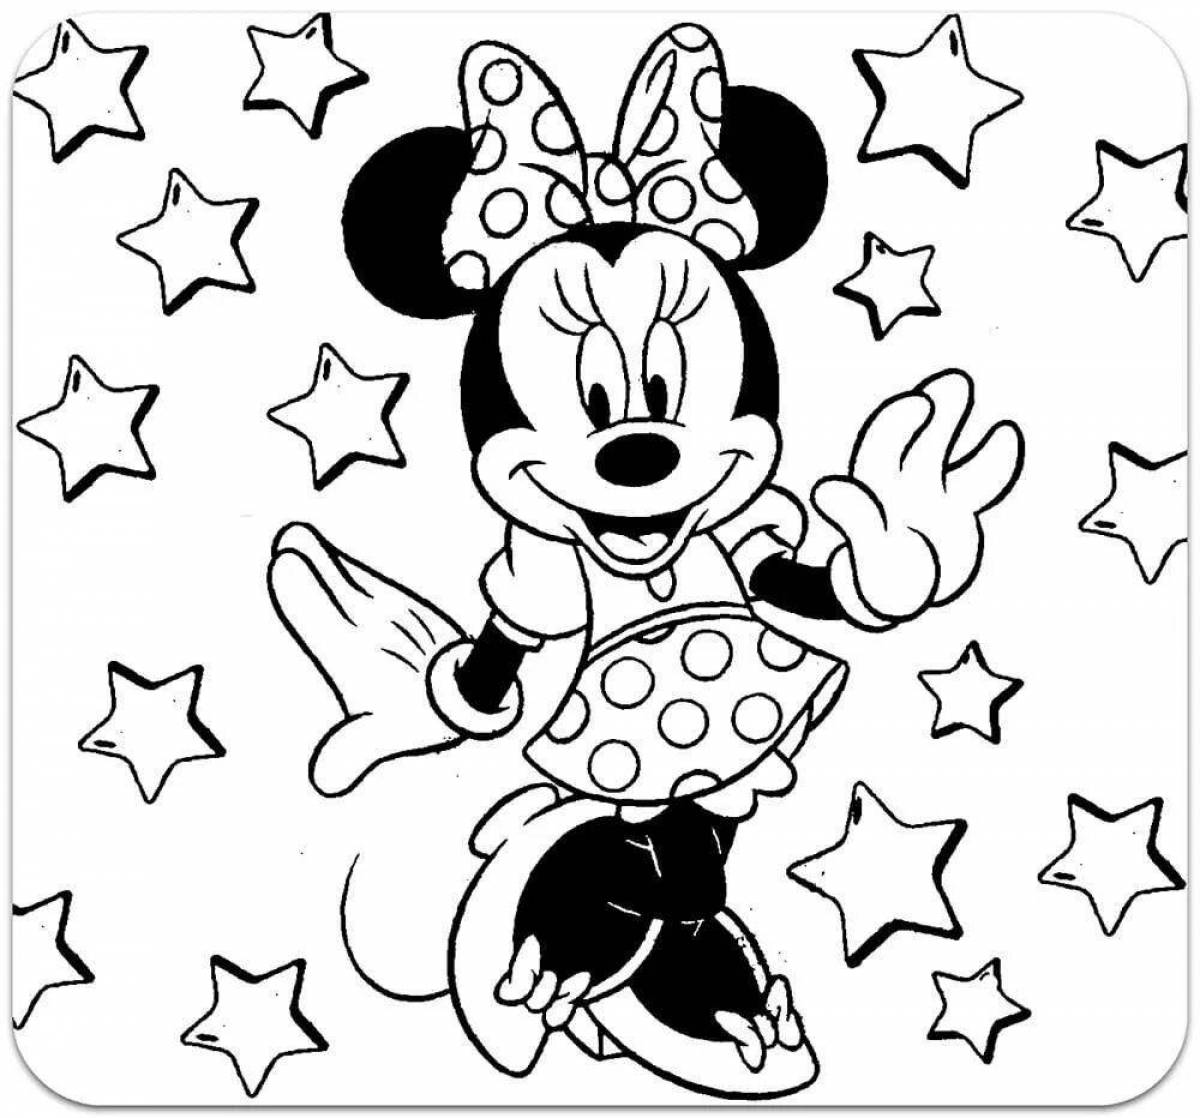 Bright mickey mouse coloring book